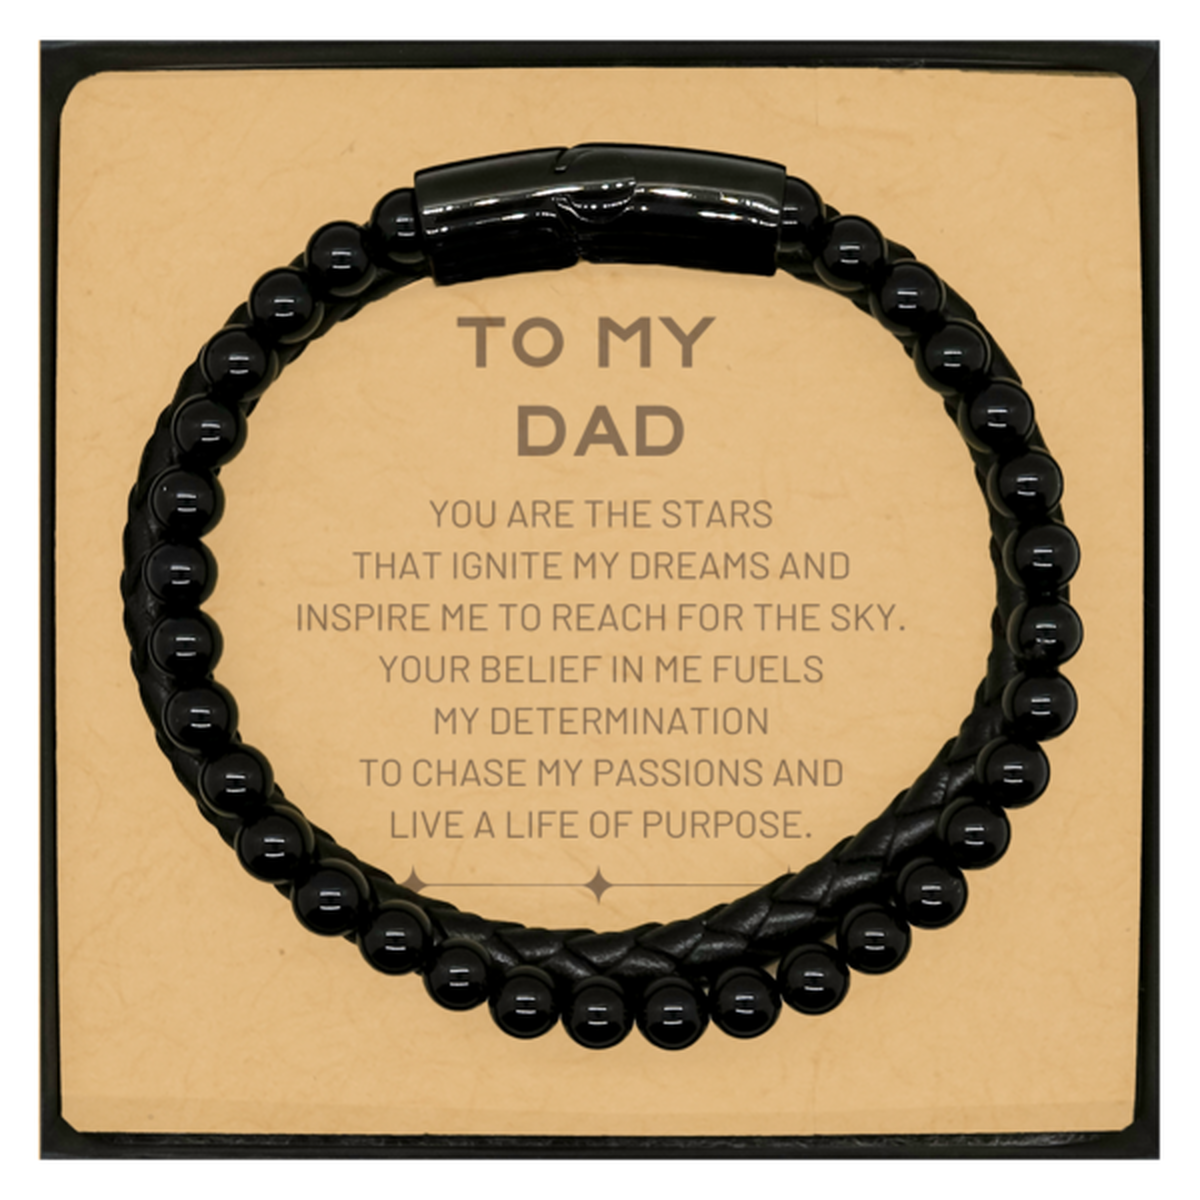 To My Dad Stone Leather Bracelets, You are the stars that ignite my dreams and inspire me to reach for the sky, Birthday Christmas Unique Gifts For Dad, Thank You Gifts For Dad